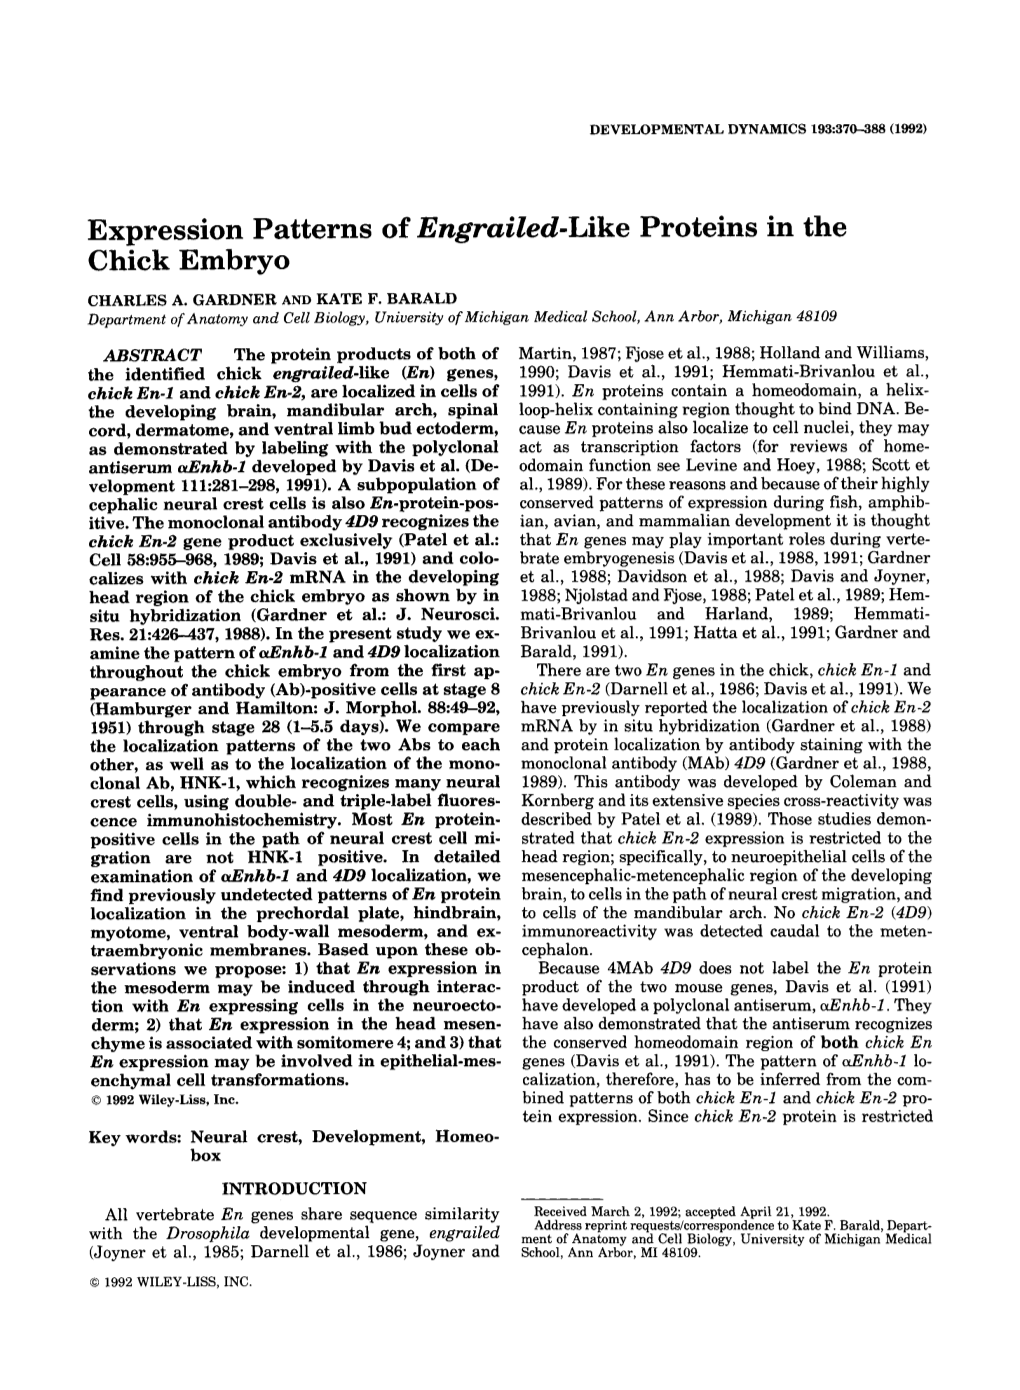 Expression Patterns of Engrailed-Like Proteins in the Chick Embryo